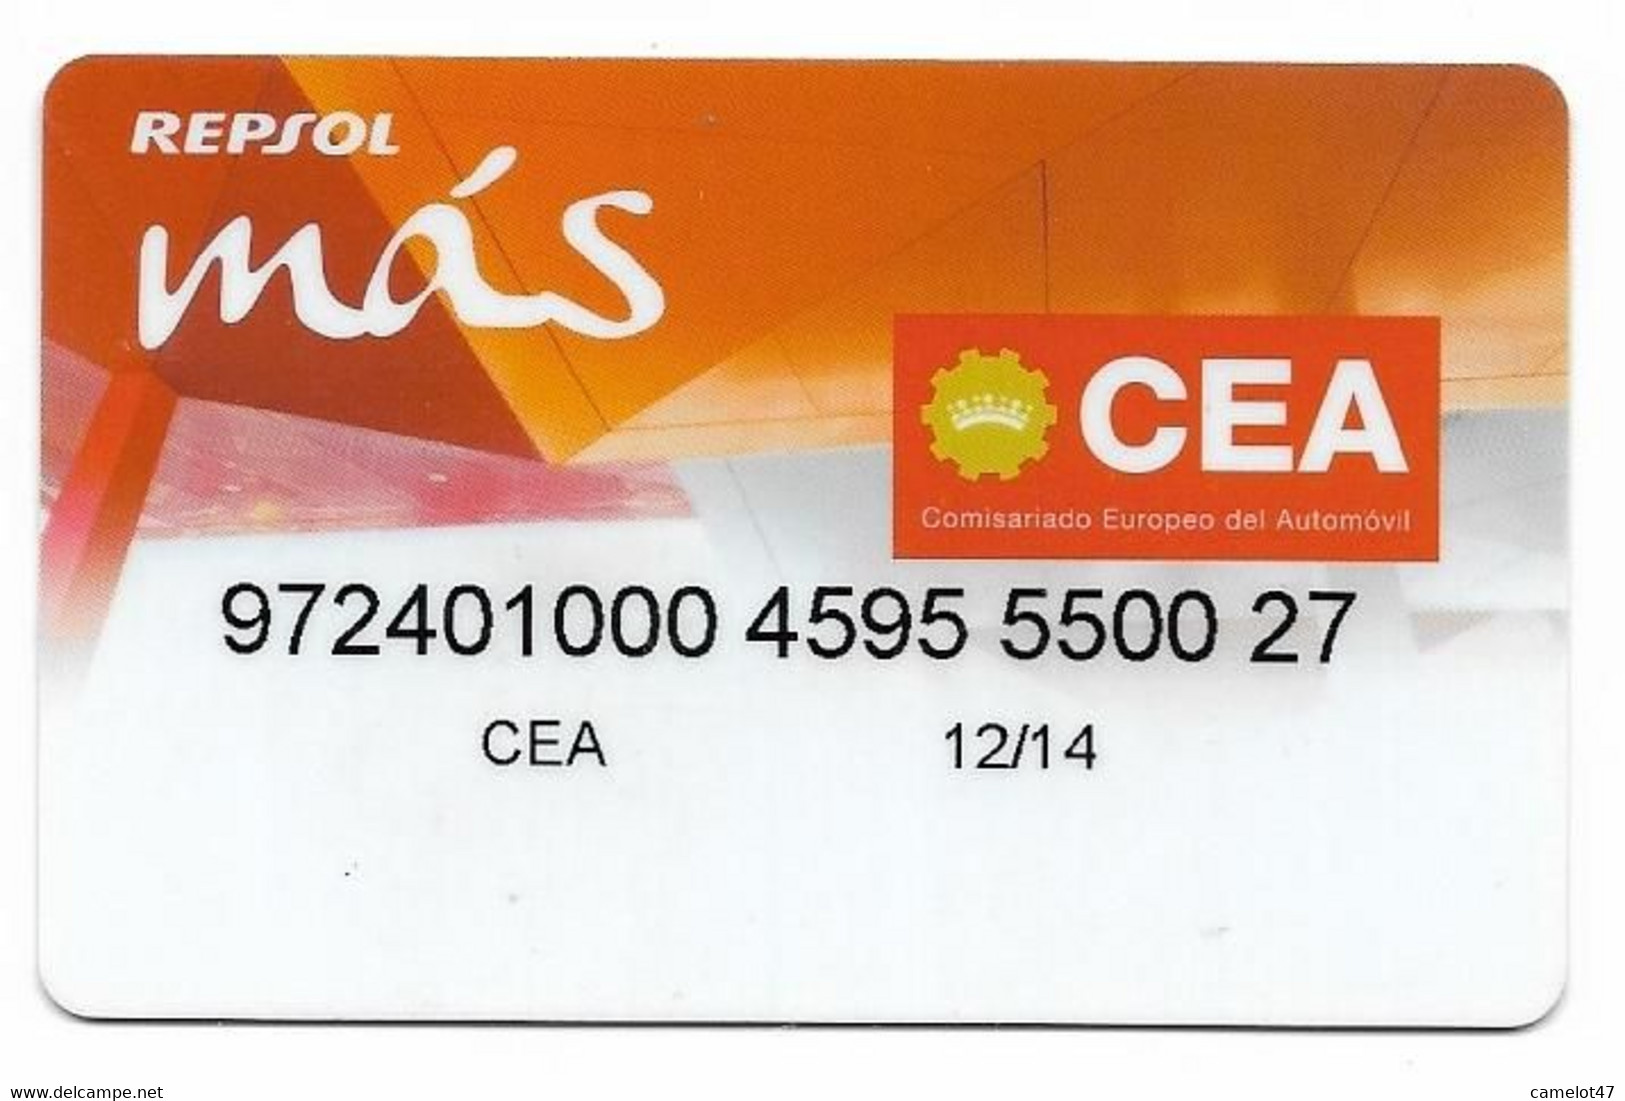 Repsol Spain, Gas Stations Magnetic Rewards Card, # Repsol-7  NOT A PHONE CARD - Oil